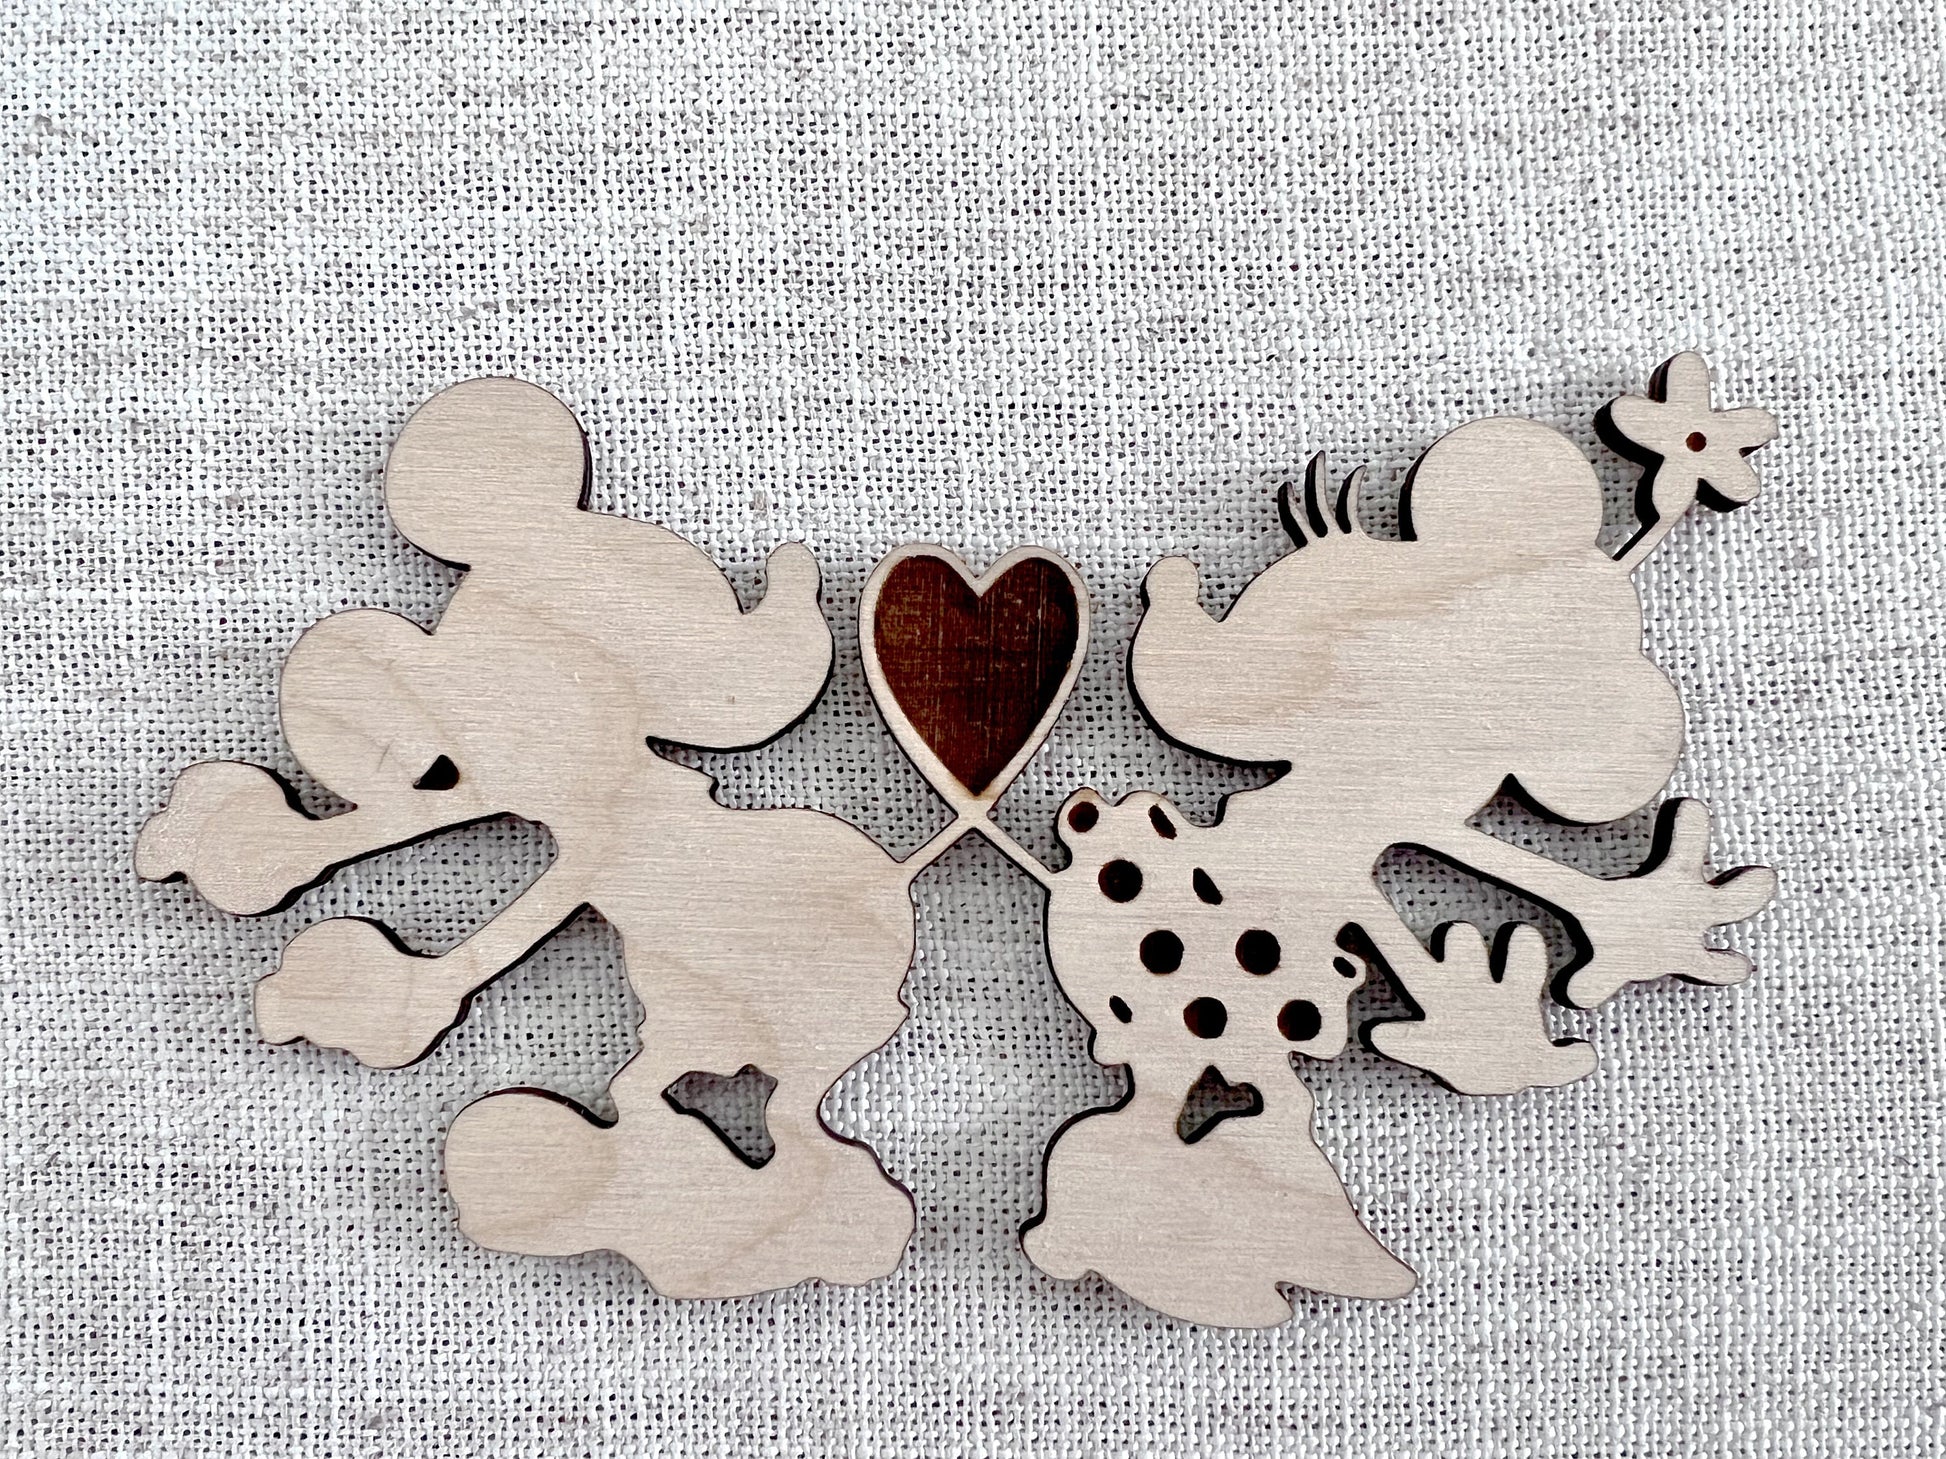 Clean Disney Inspired Pin Trading Board With Mickey and Minnie In Love | Pin Trader Board | Pin Display Board | Pin Trading Cork Board